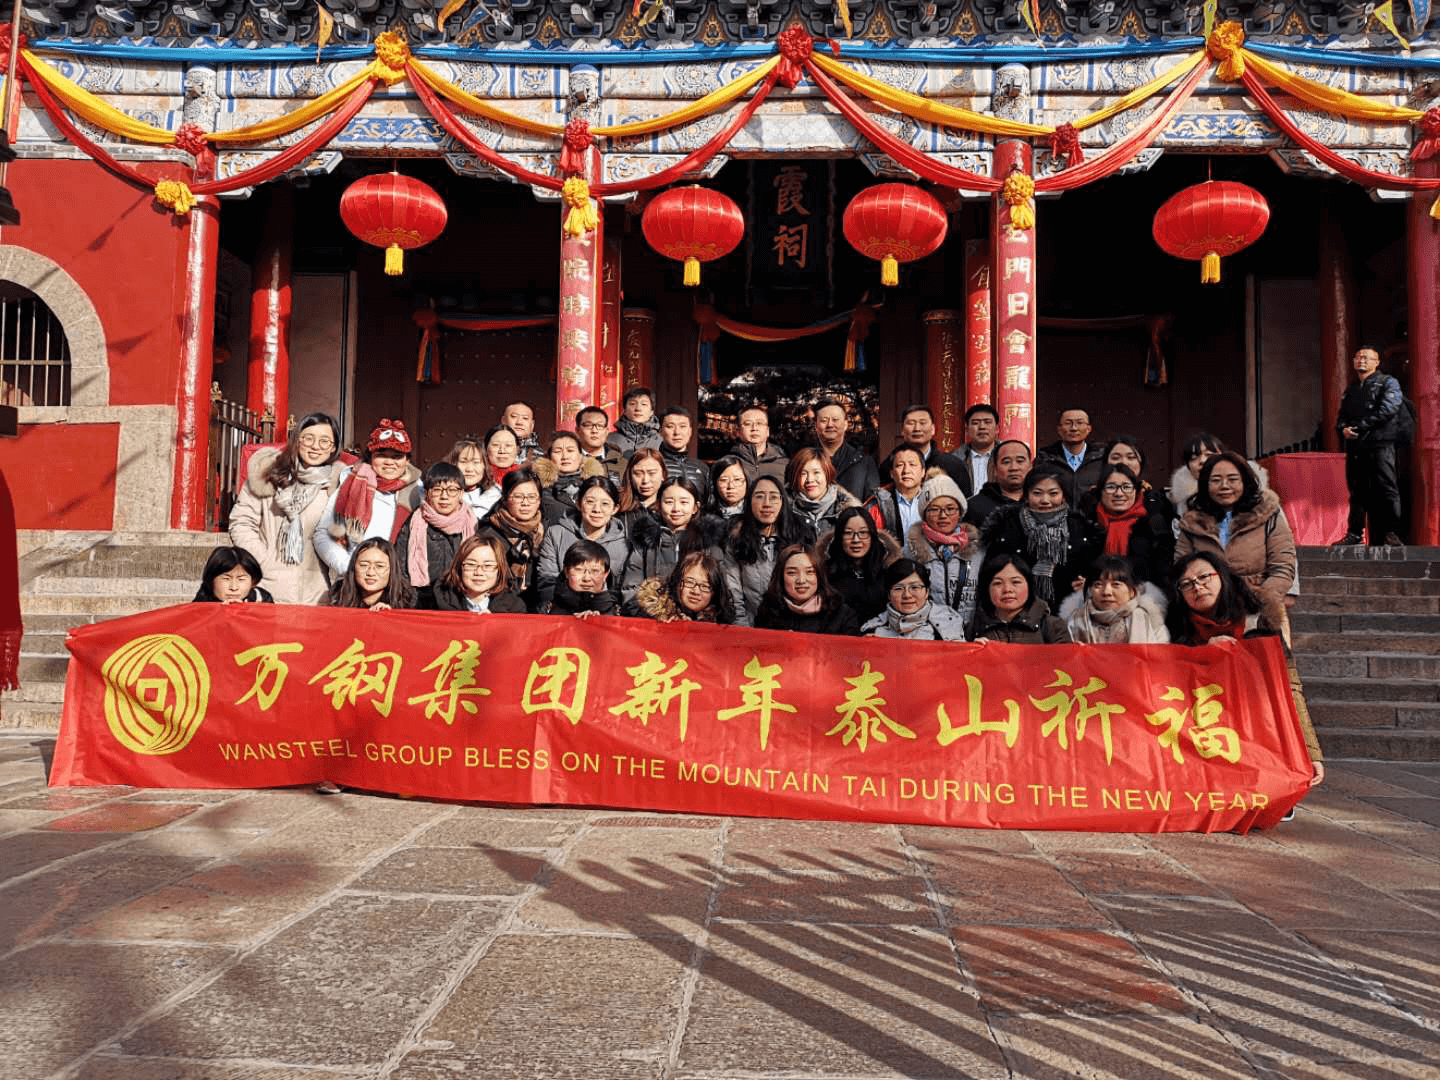 2019 BLESSING THE MOUNT TAI, FLYING THE DREAM